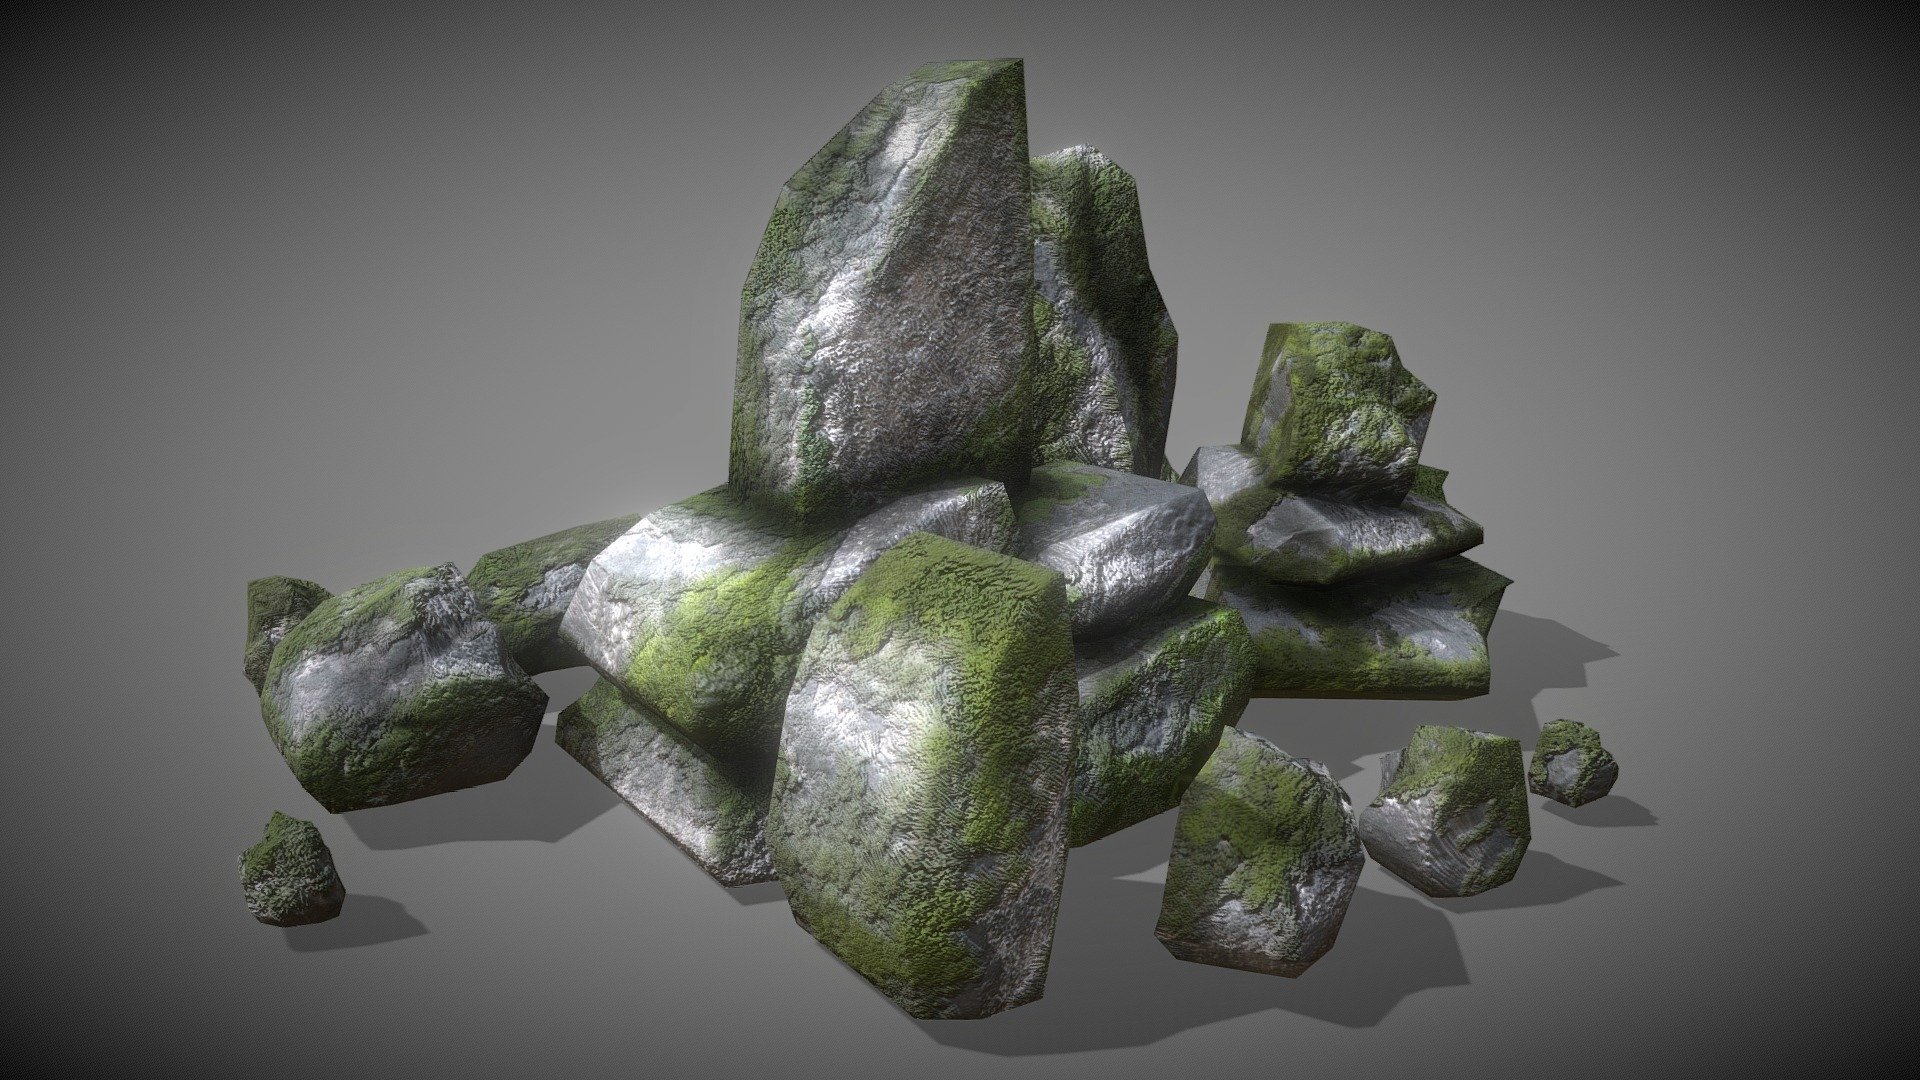 50,632 Moss Covered Rocks Images, Stock Photos, 3D objects